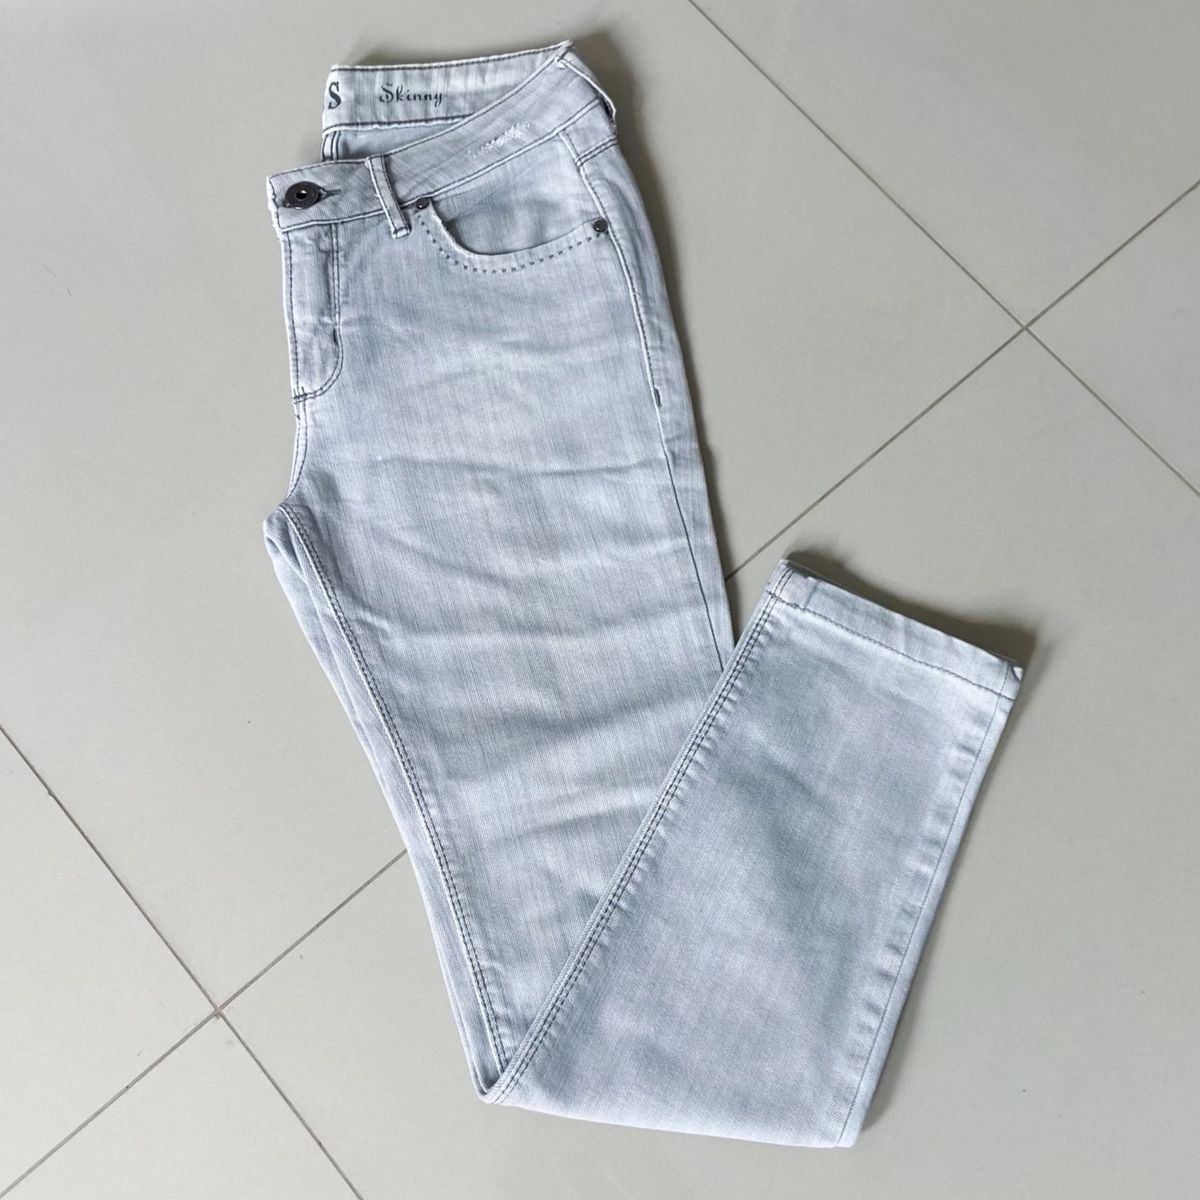 bpc bonprix collection Jeans at reasonable prices, Secondhand